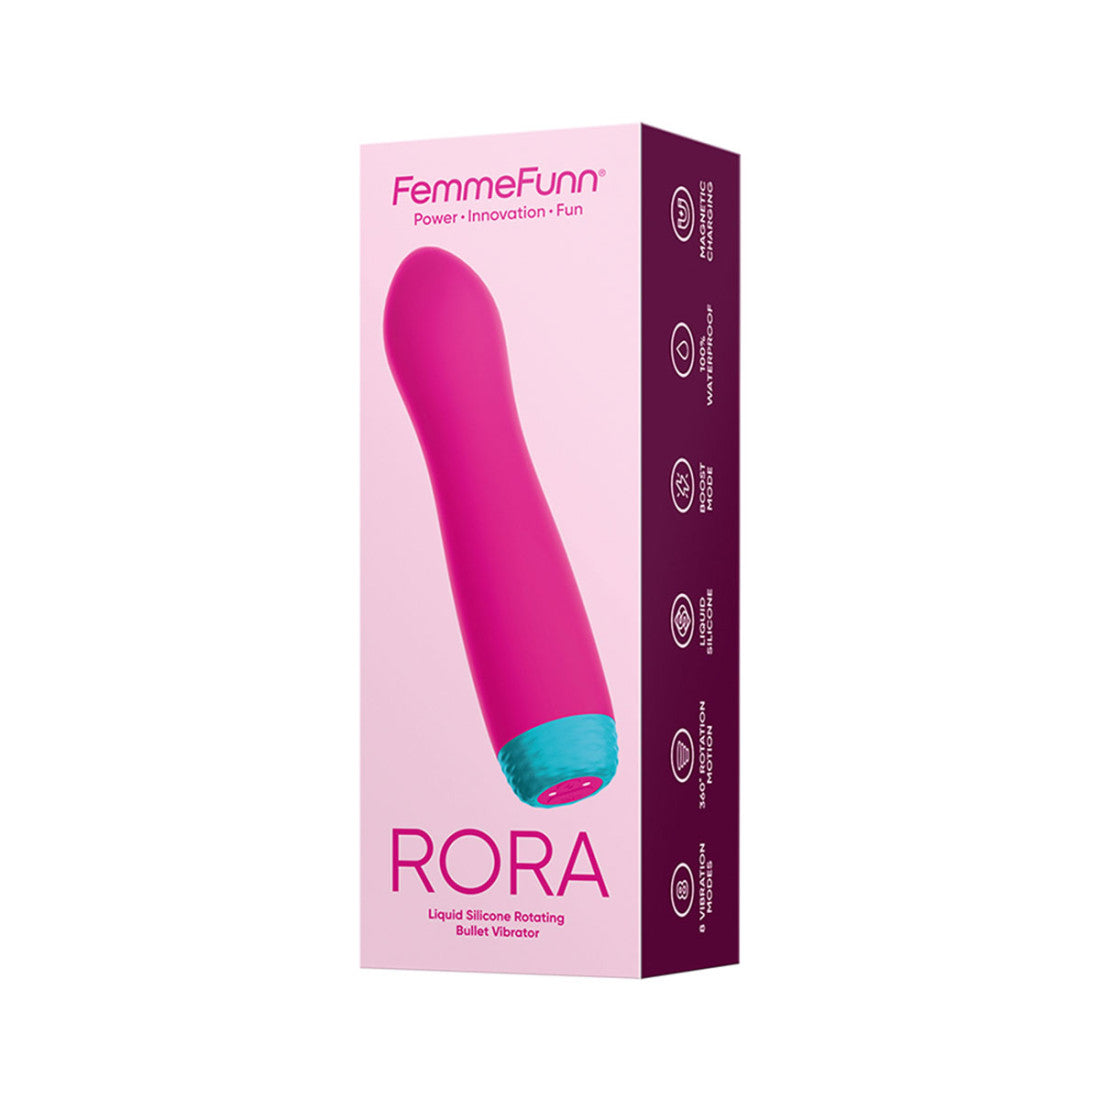 Femme Funn Rora Rotating Bullet – The Pique Place